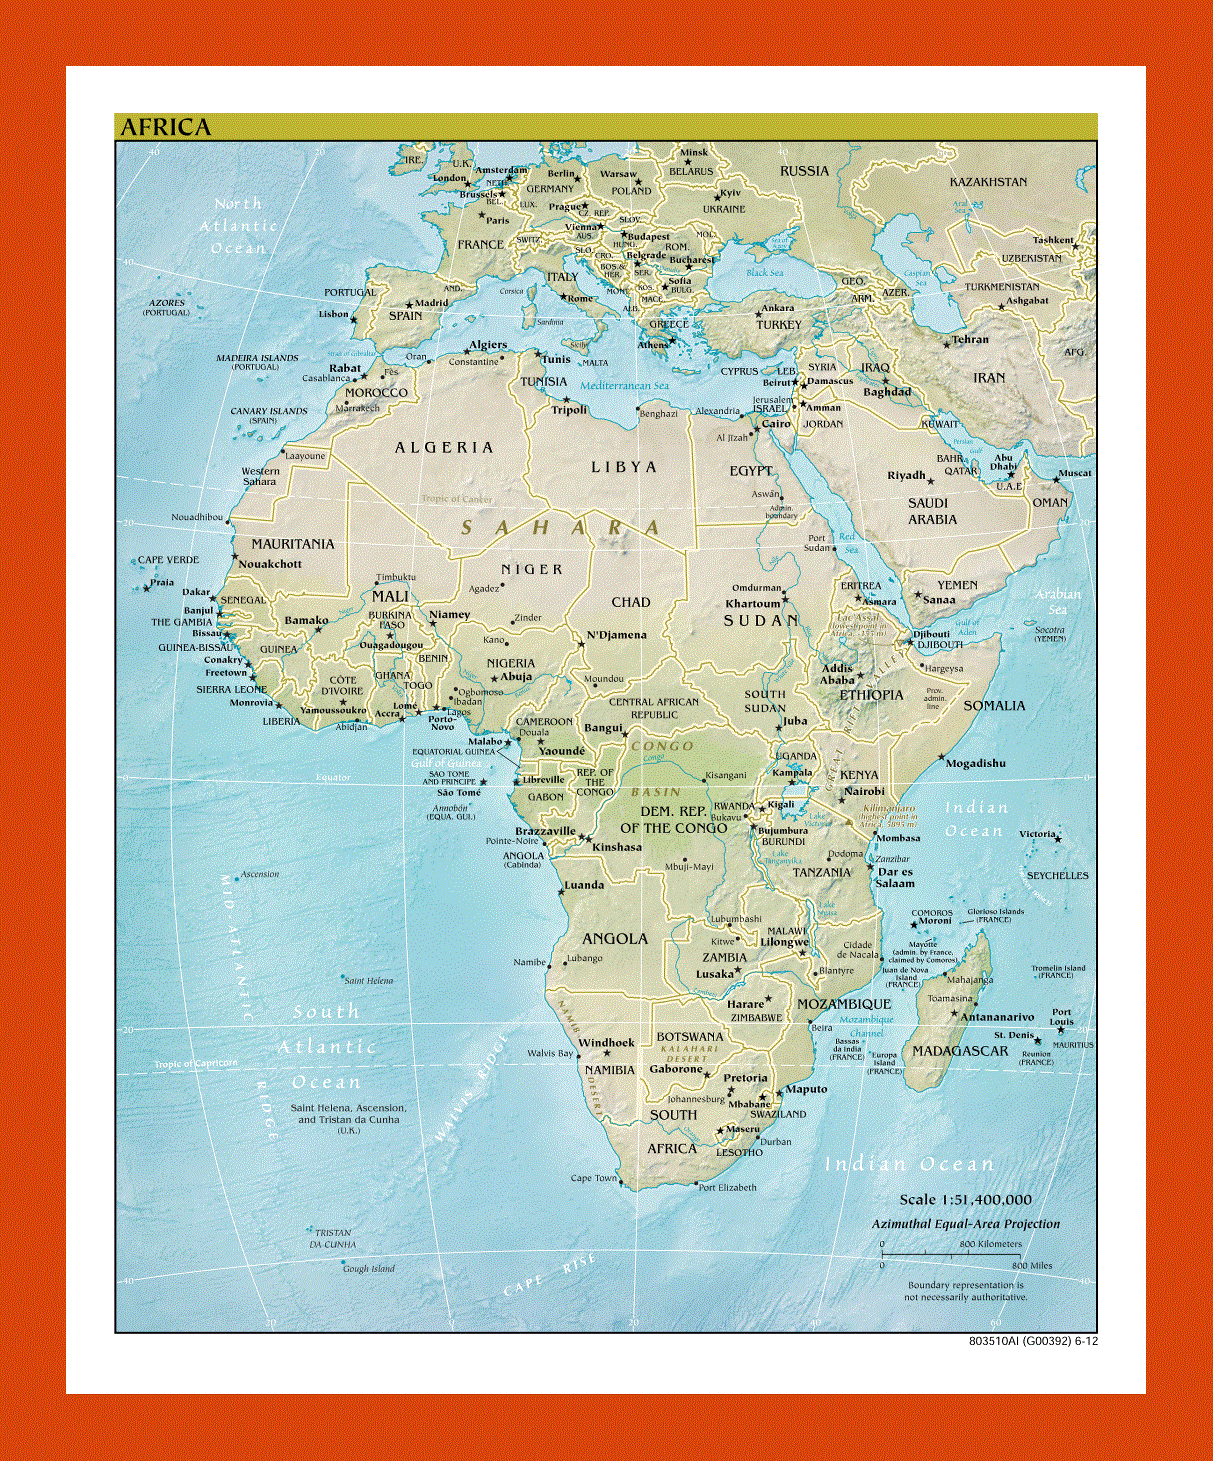 Political map of Africa - 2012